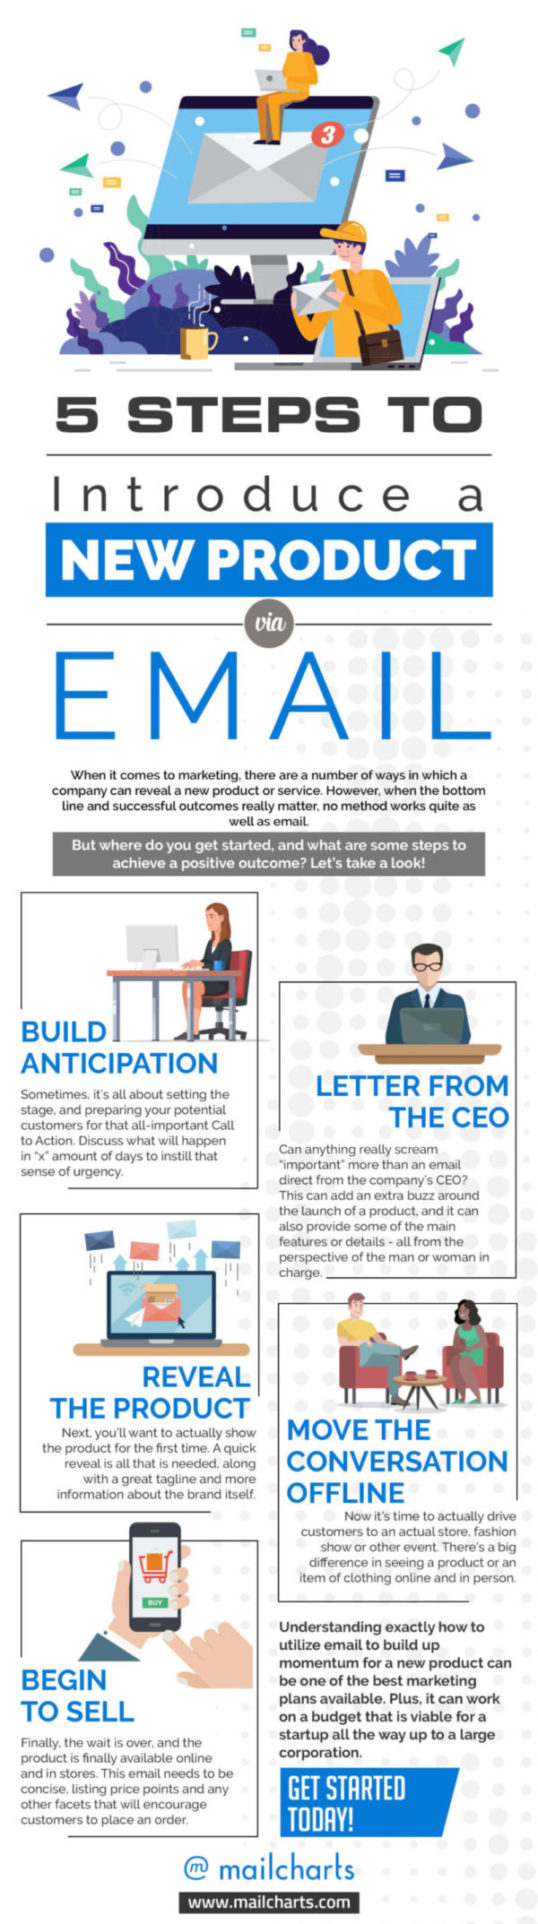 5 Steps to Introduce a New Product Via Email